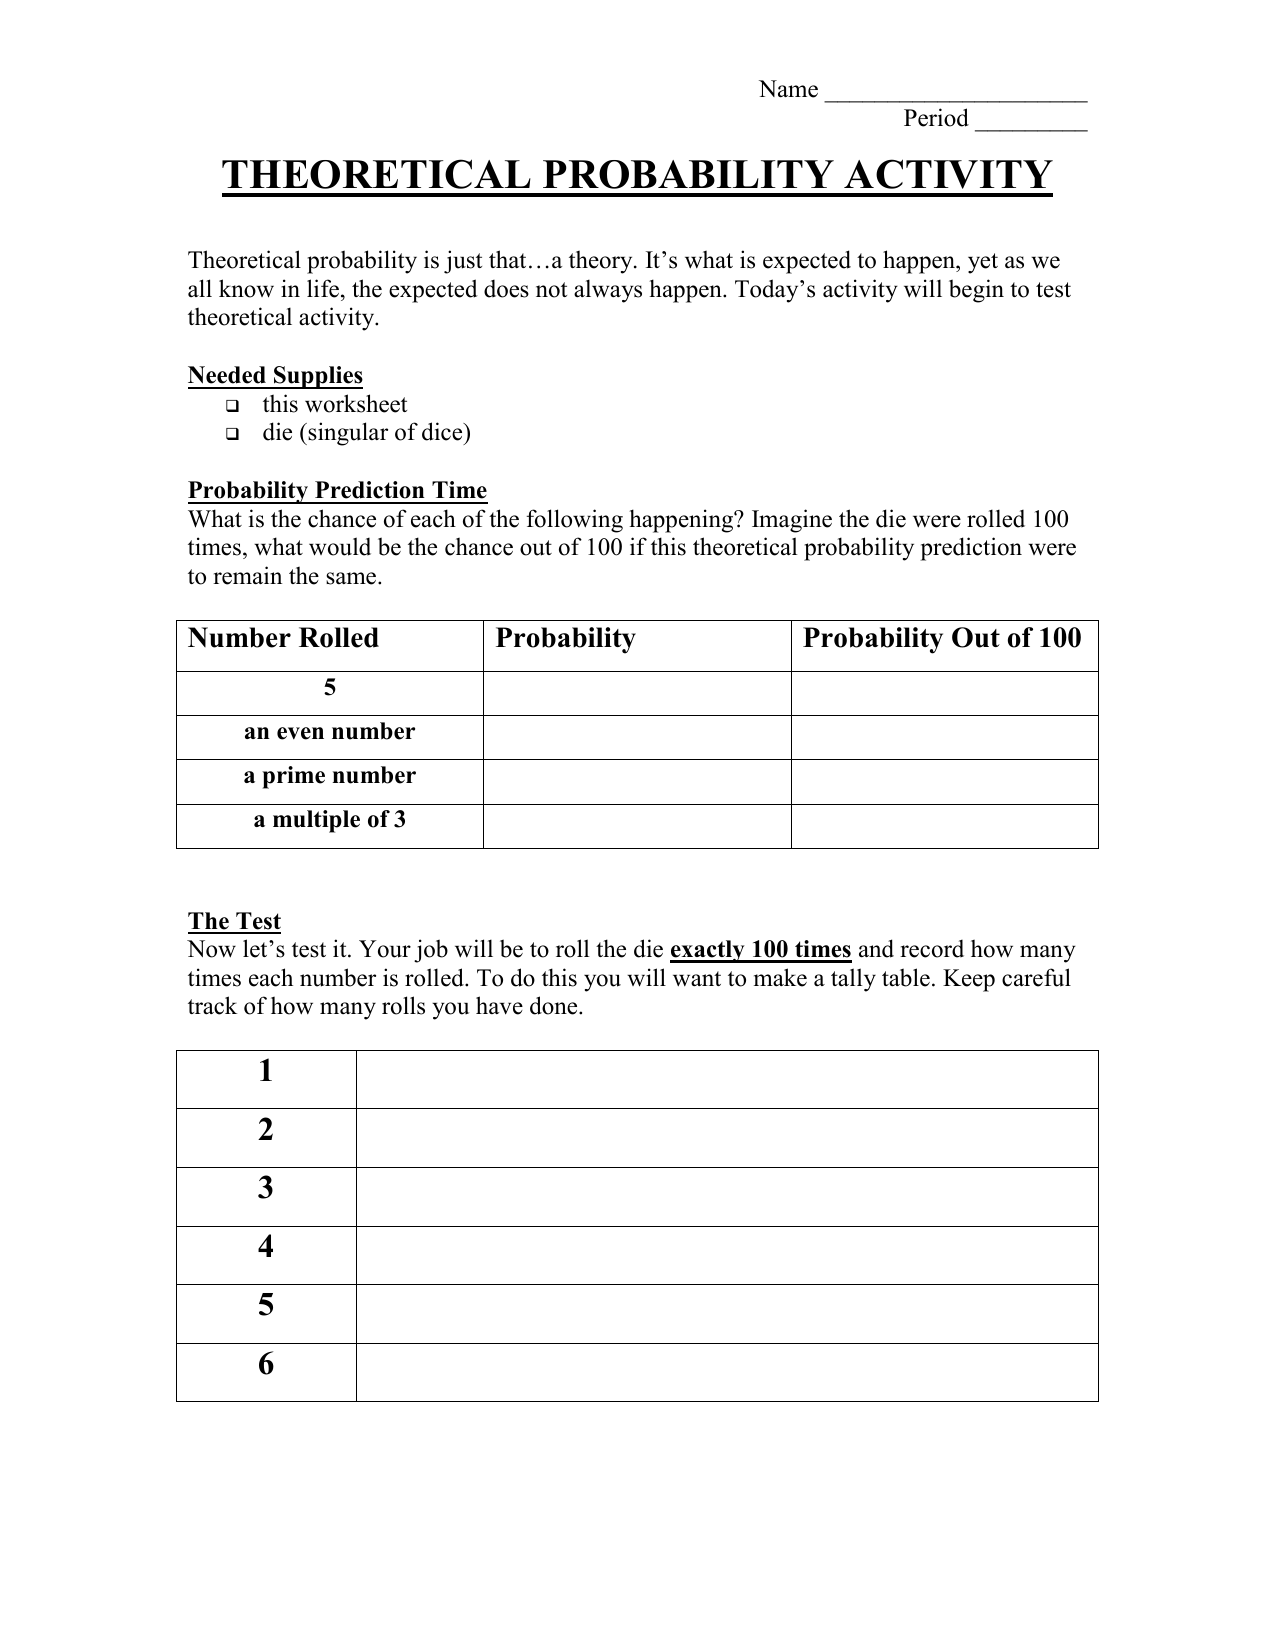 theoretical-and-experimental-probability-lesson-plan-21th-grade With Theoretical And Experimental Probability Worksheet